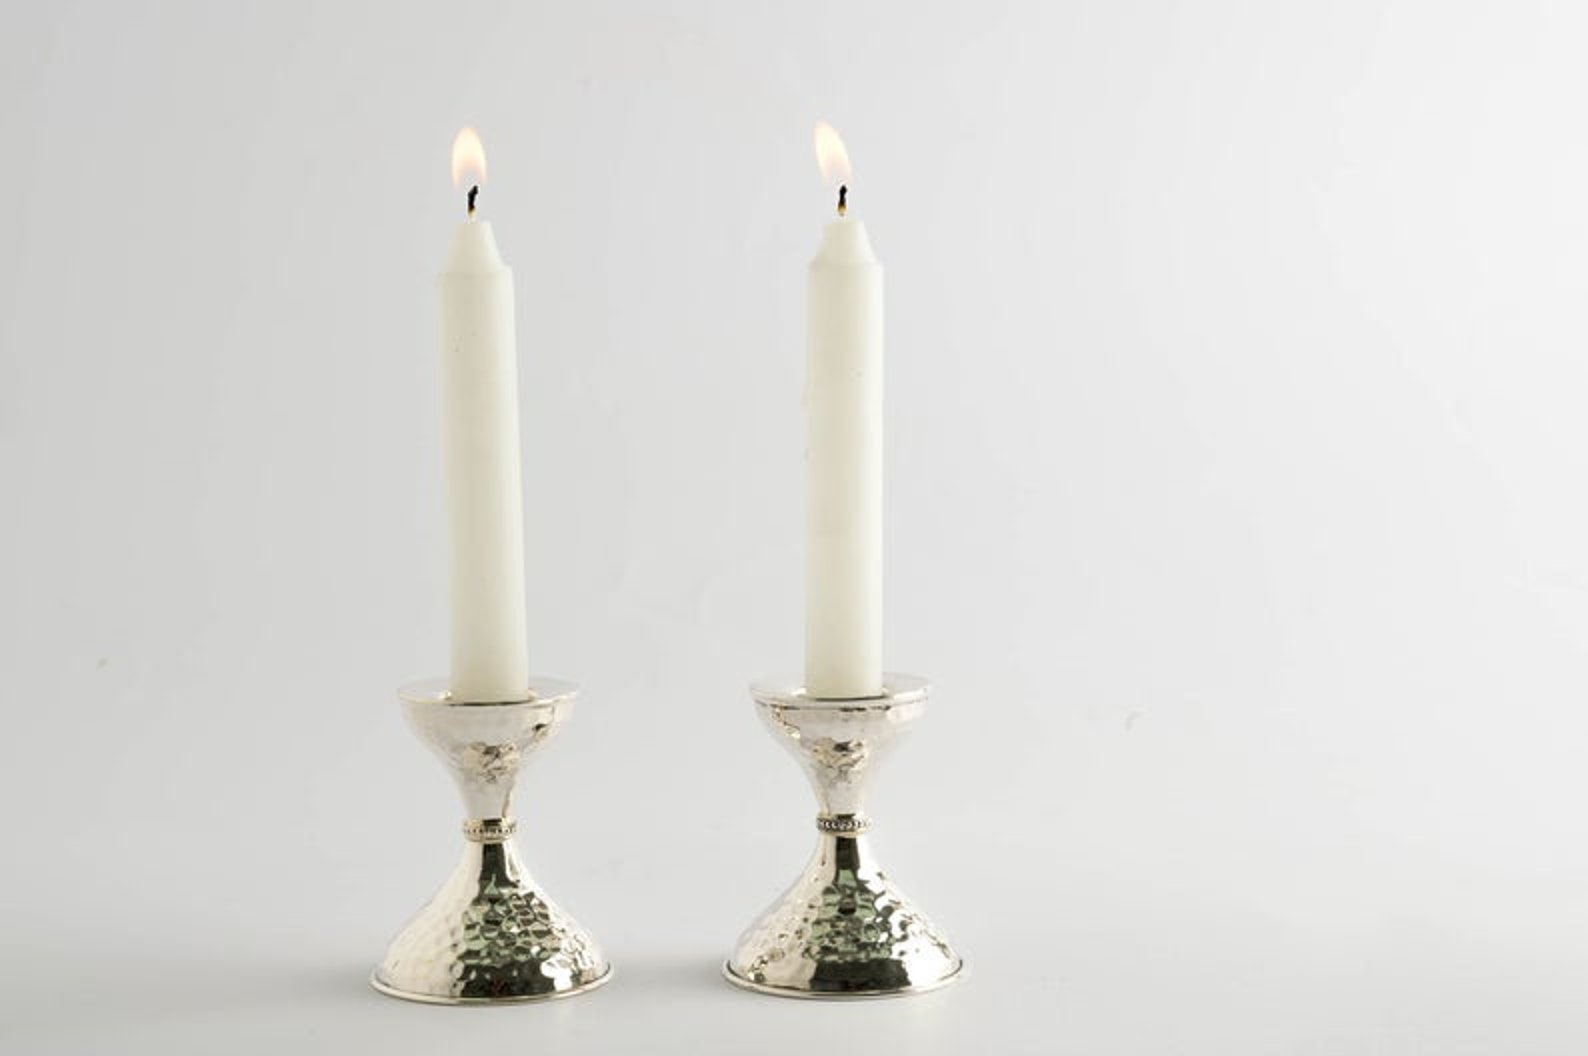 Small Sterling Silver Candlesticks Hammered Finishing